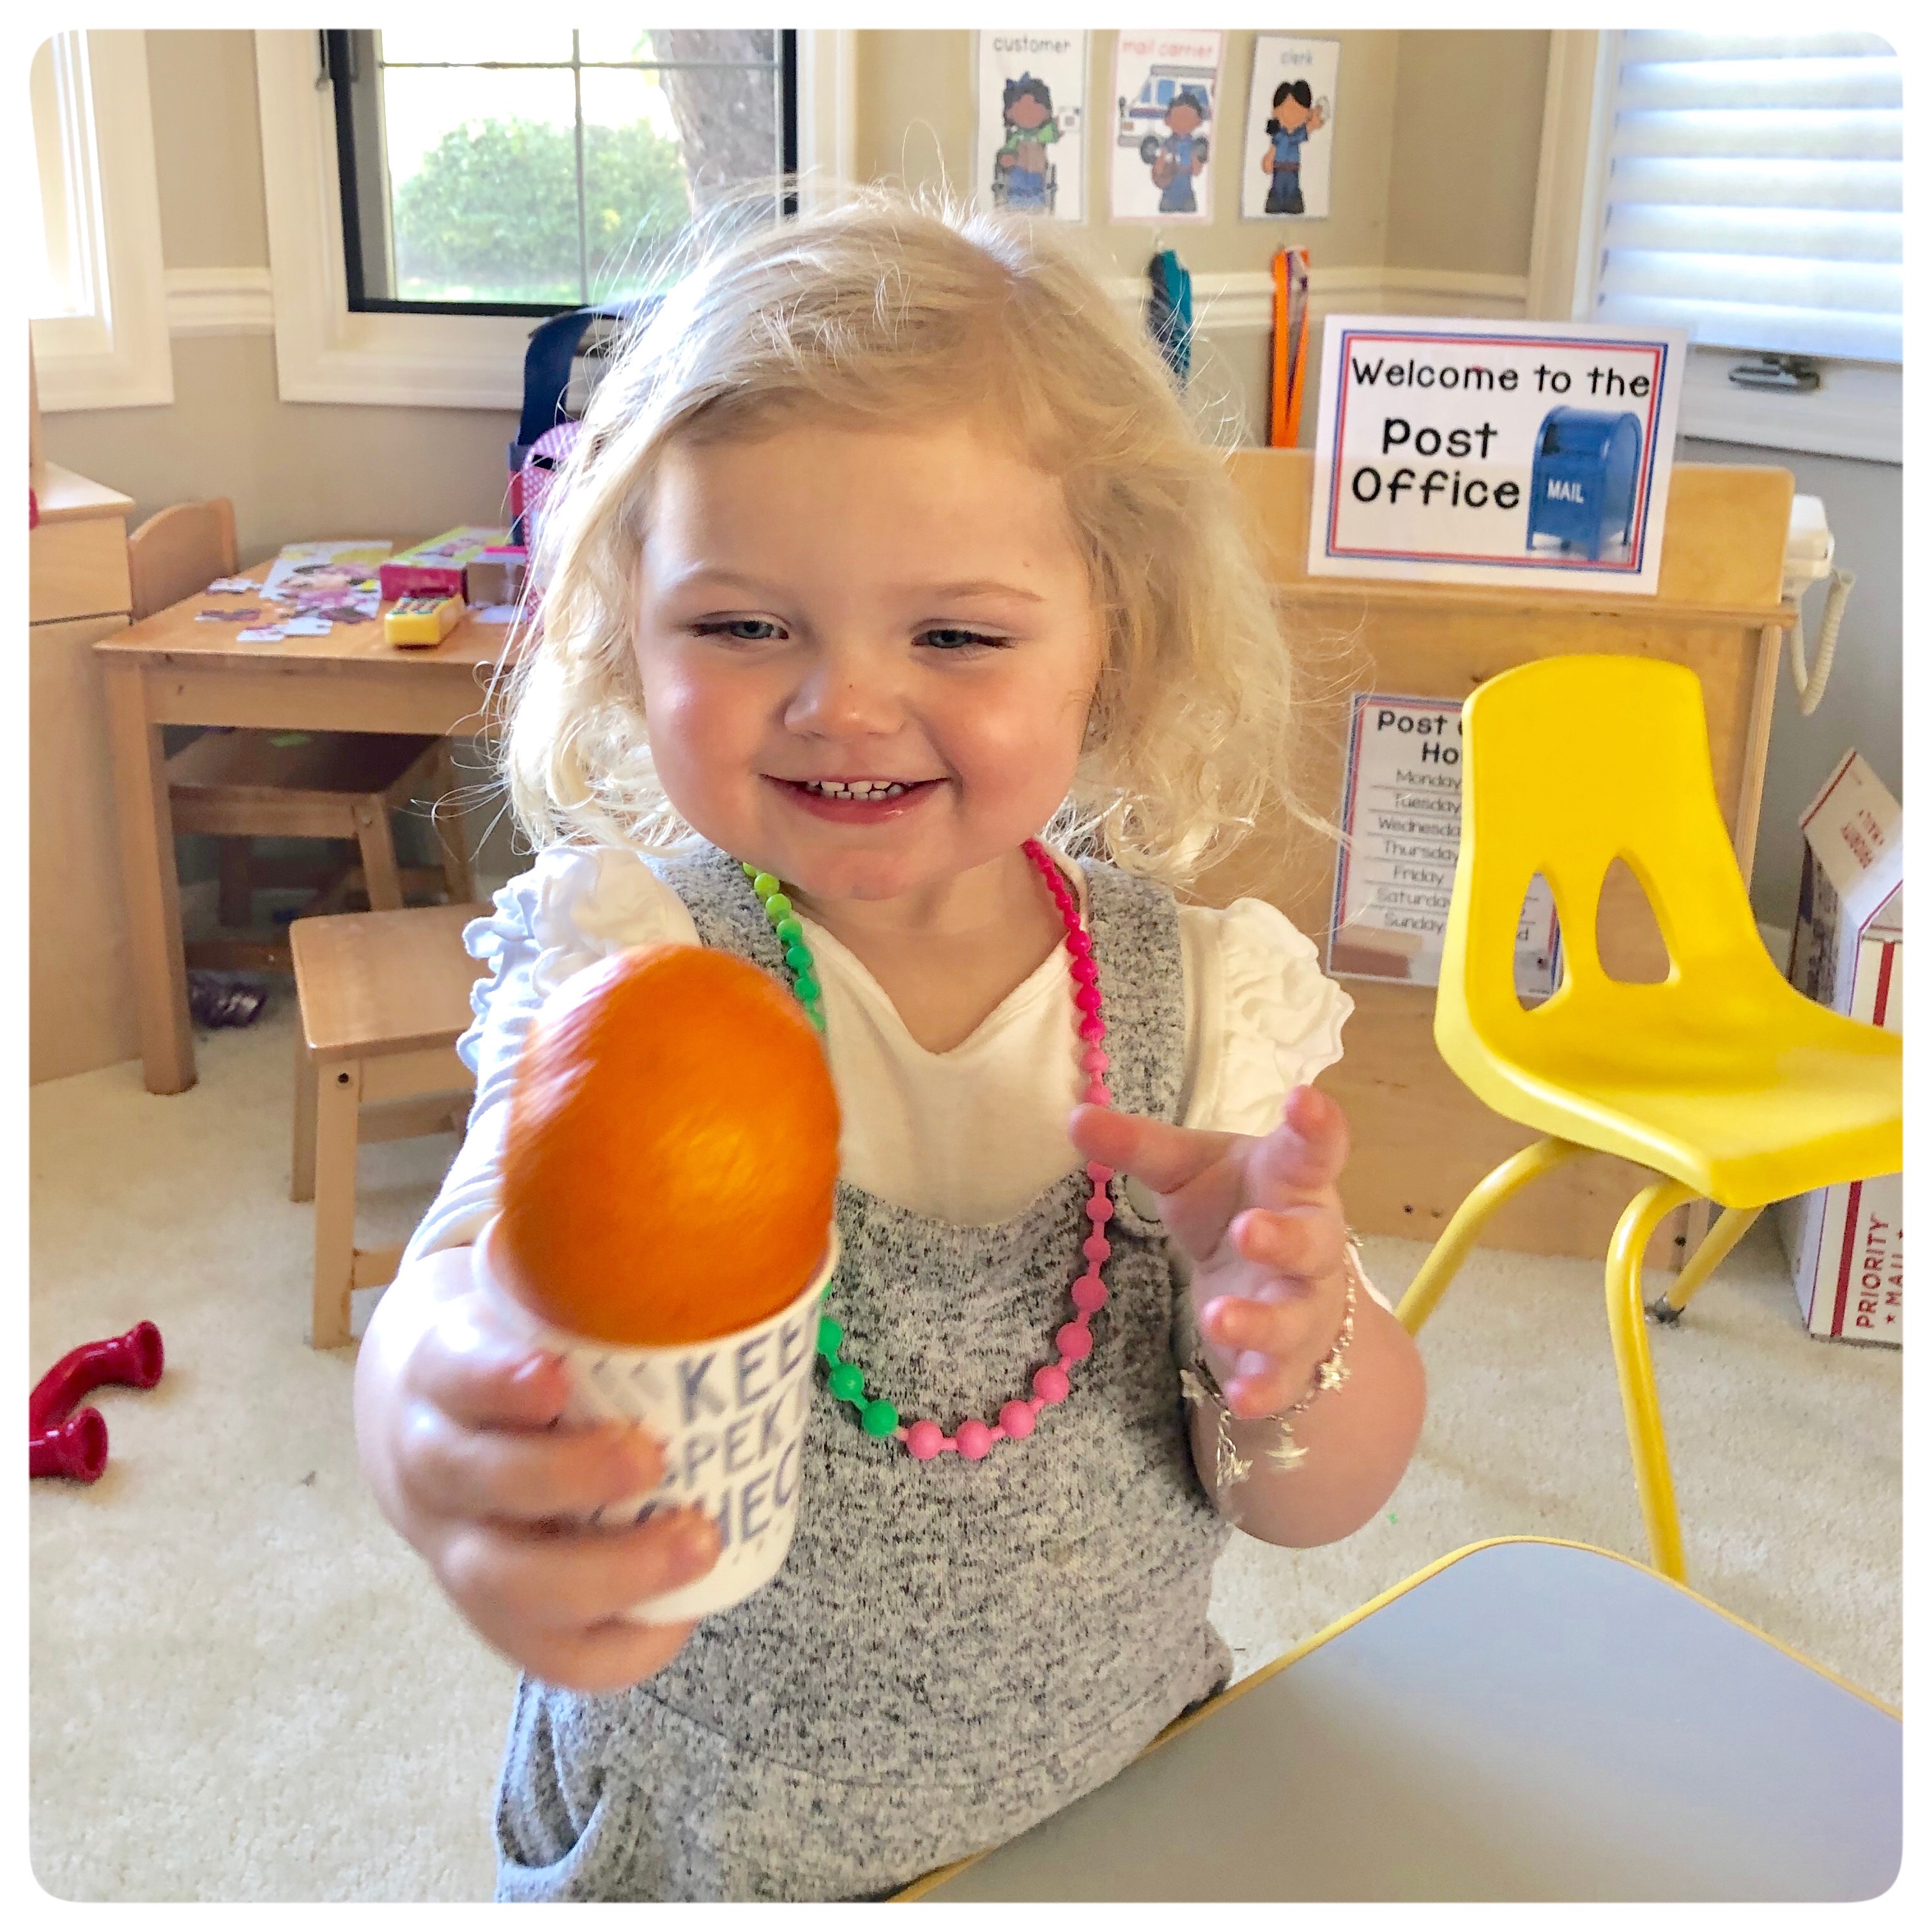 🍊Orange Juice kind of day🍊 .What better way to incorporate sensory play, learning life skills, and snack time than to create your very own Orange Juice! . Look how proud they are! 💞 Makes my heart happy how they care for each other